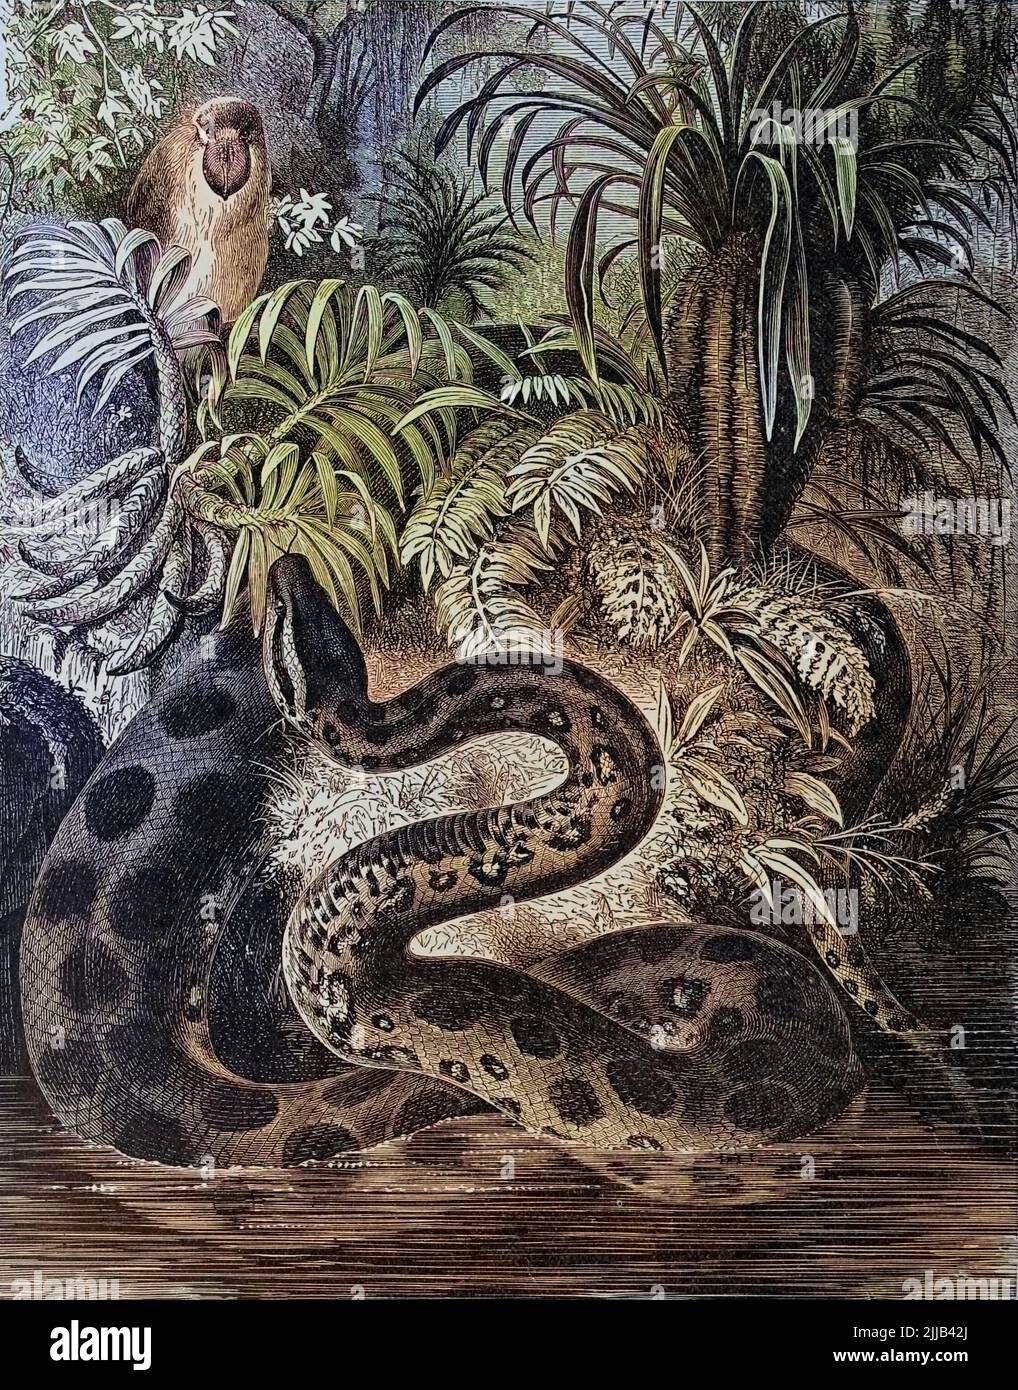 The Home of the Anaconda Anacondas or water boas are a group of large snakes of the genus Eunectes. They are found in tropical South America. from The royal natural history EDITED  BY RICHARD LYDEKKER Volume V 1896 Stock Photo